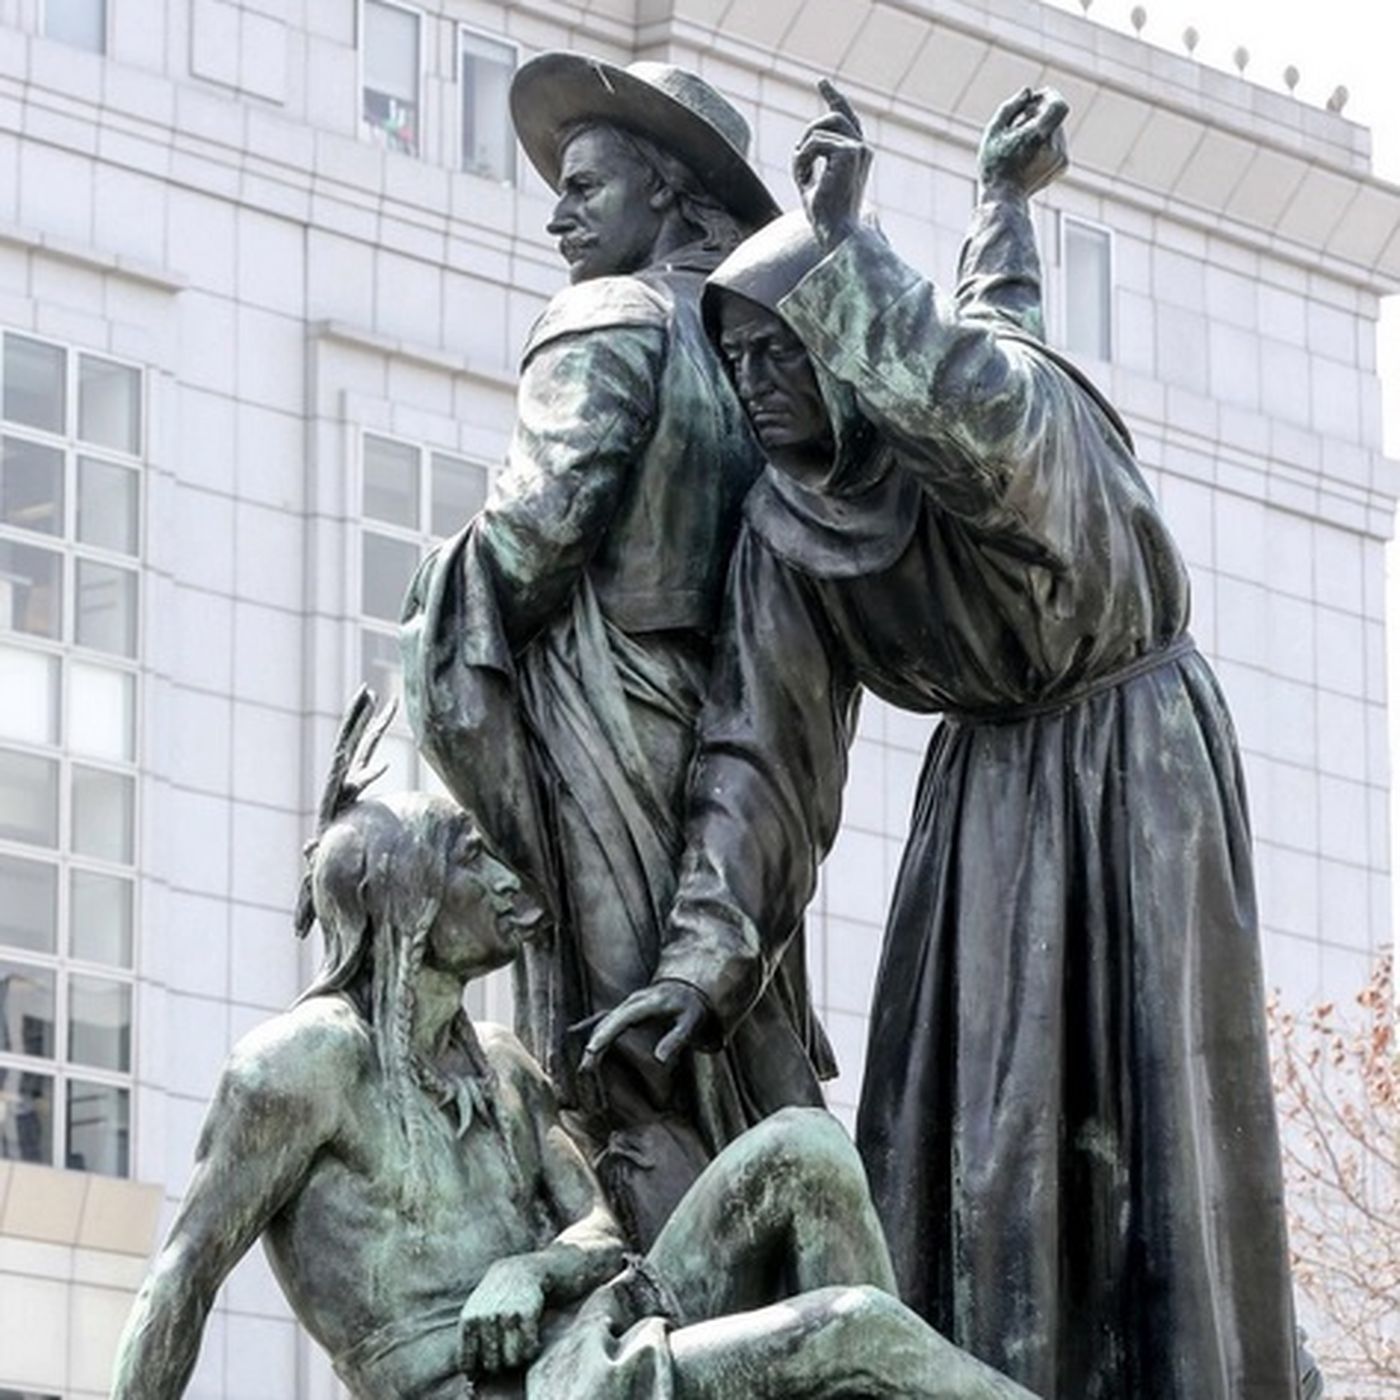 San Francisco will officially remove racist Pioneer Monument statue ...